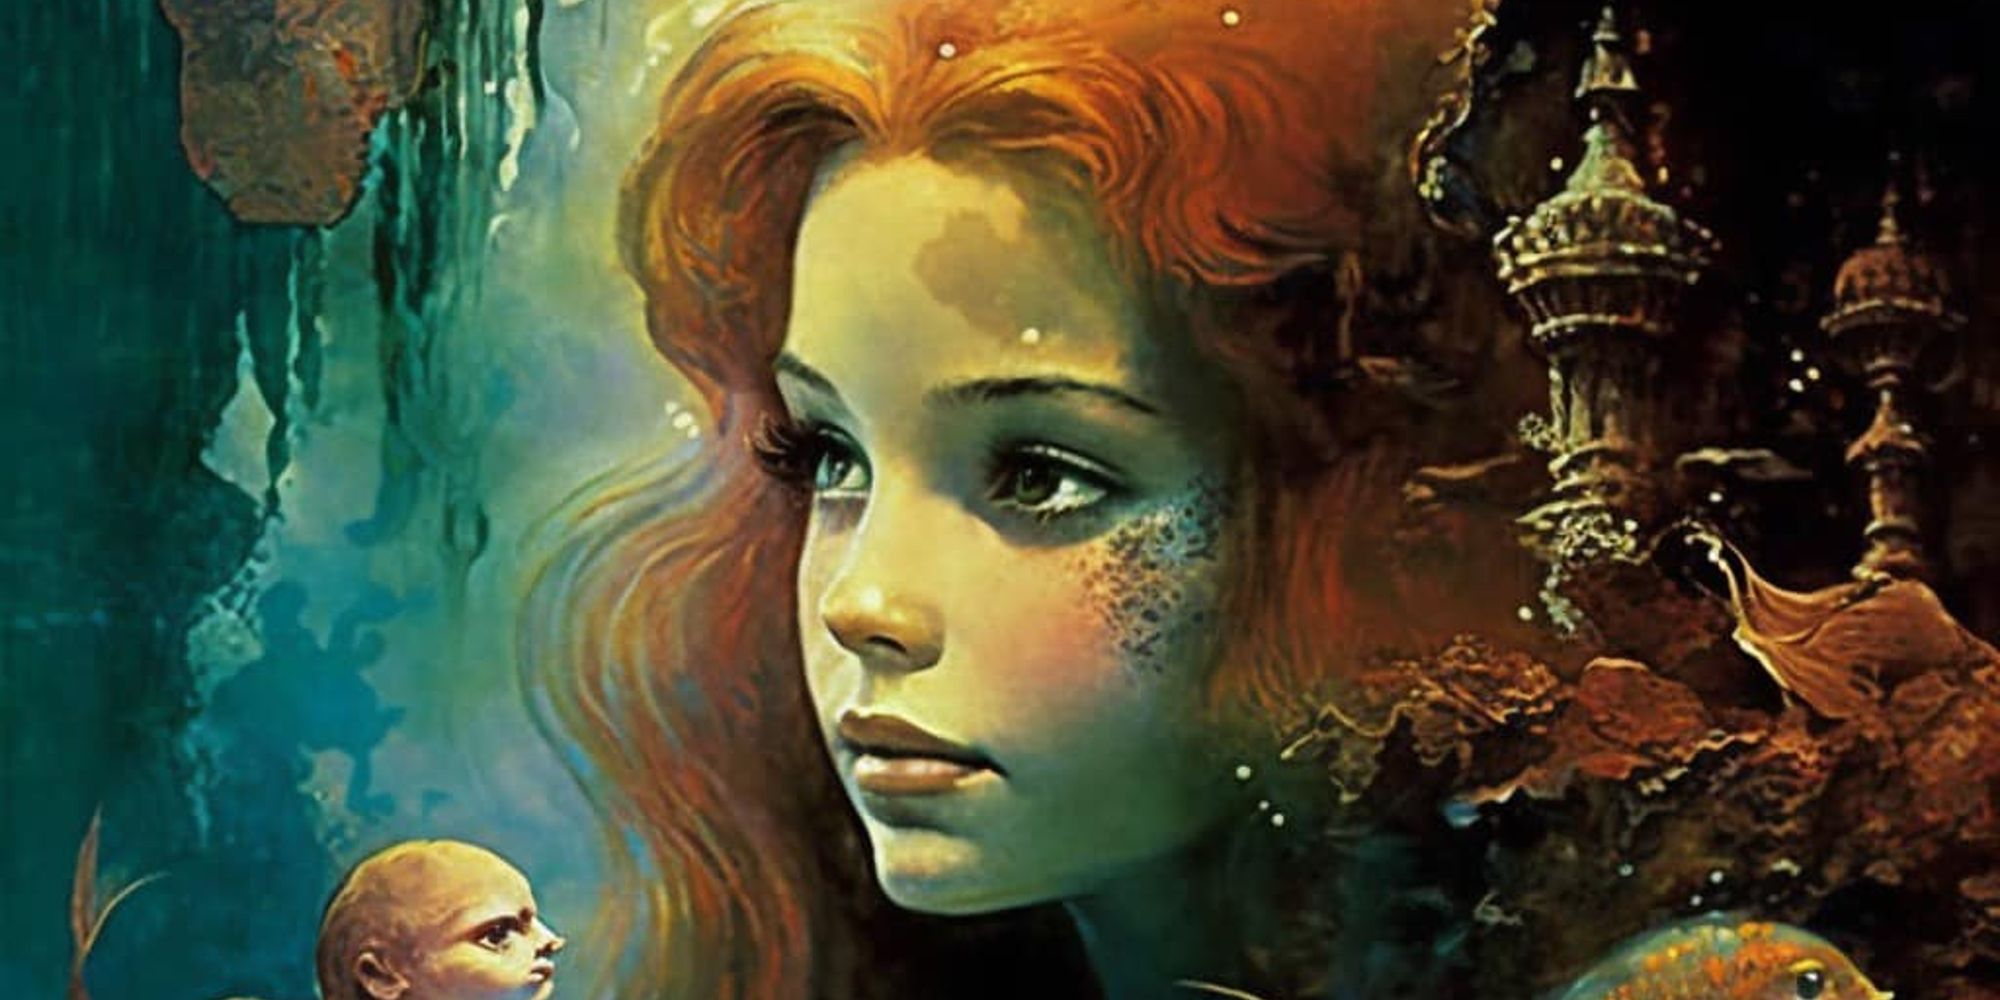 Ariel on a poster for The Little Mermaid imagined as a 70s movie with AI generated artwork